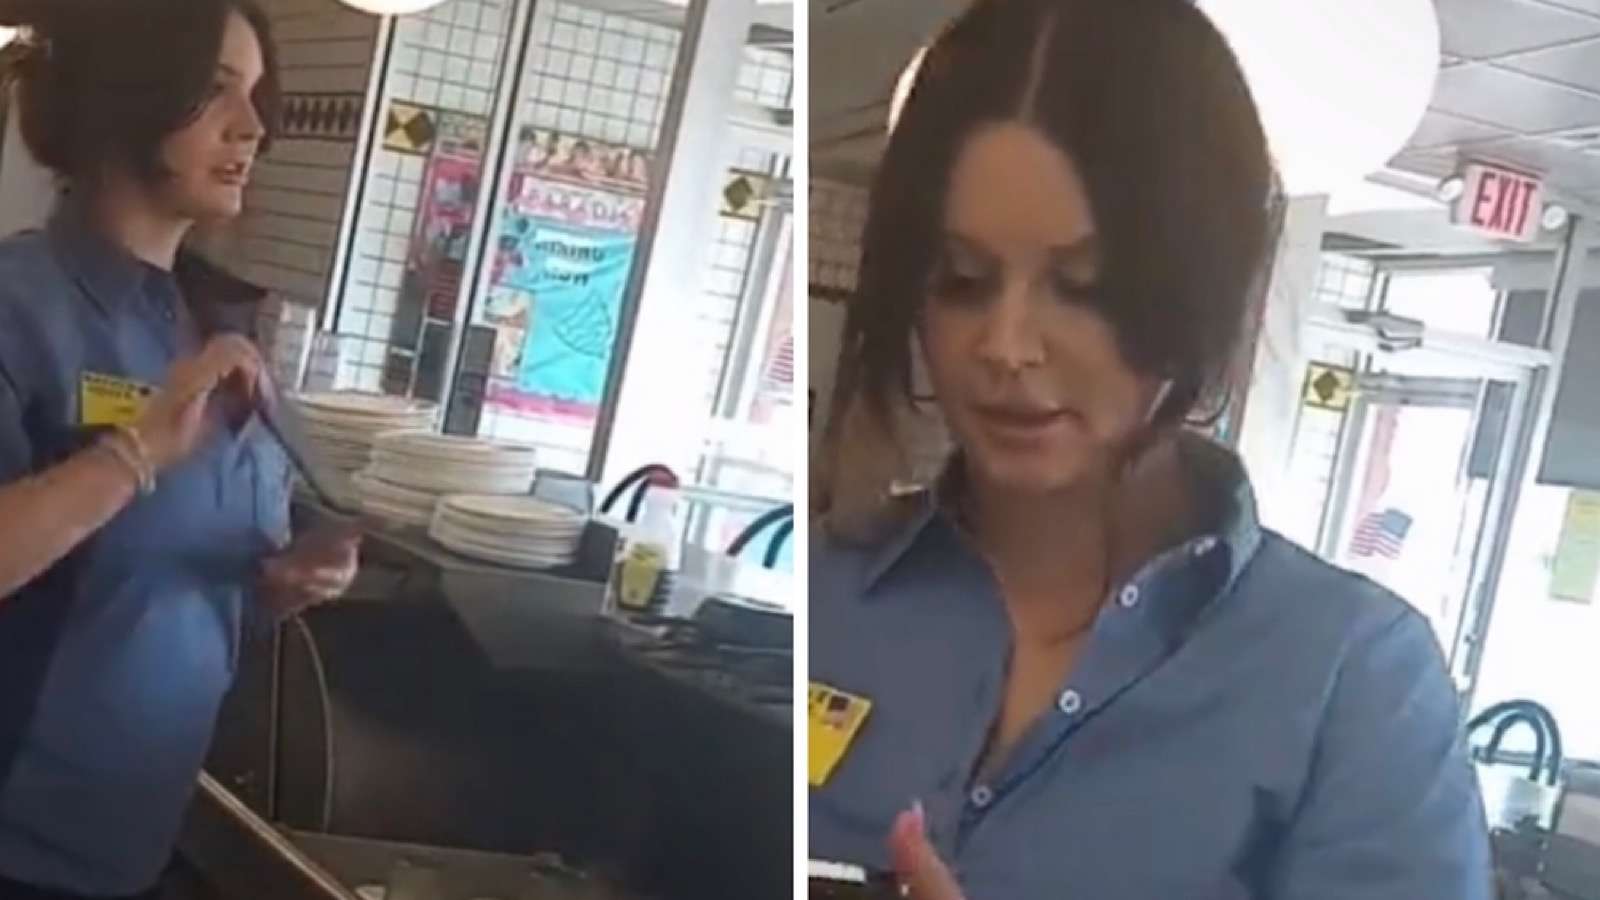 Lana Del Rey working at a Waffle House in Alabama.